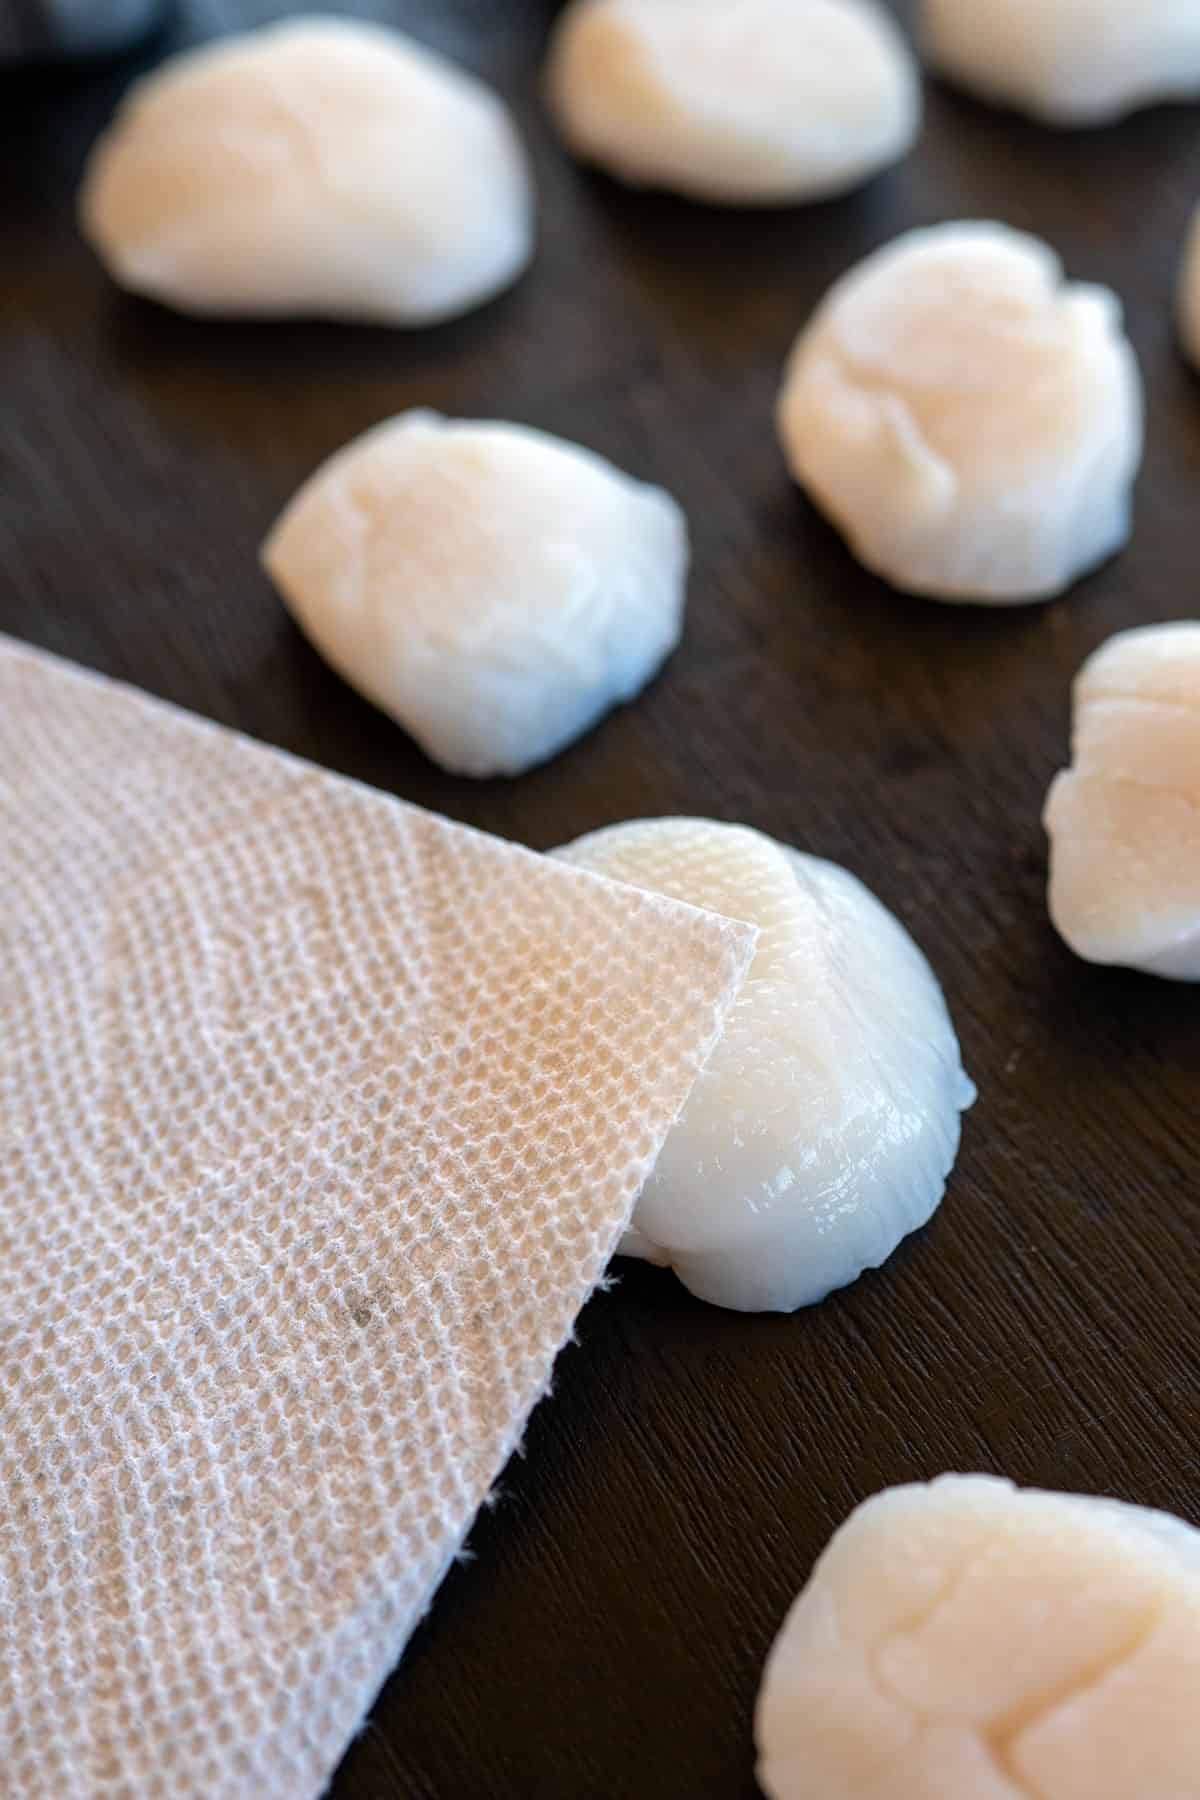 patting scallops dry with a paper towel.